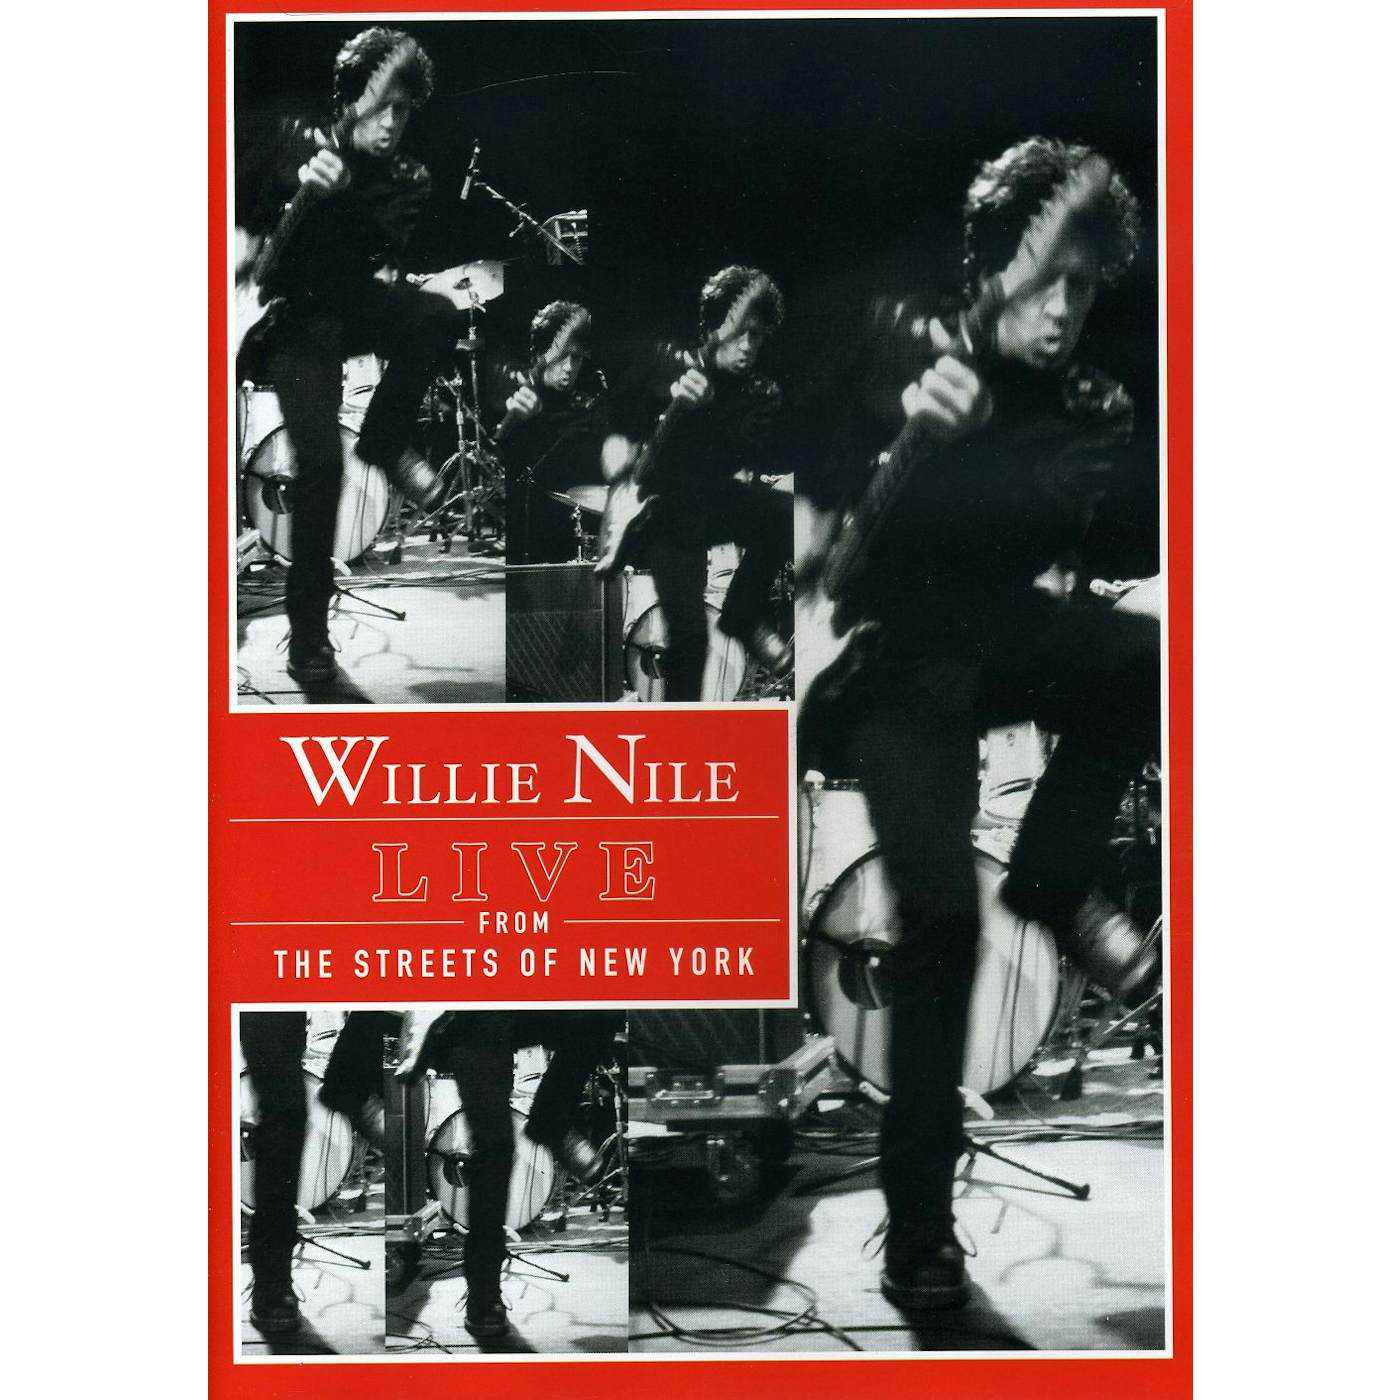 Willie Nile LIVE FROM THE STREETS OF NEW YORK DVD